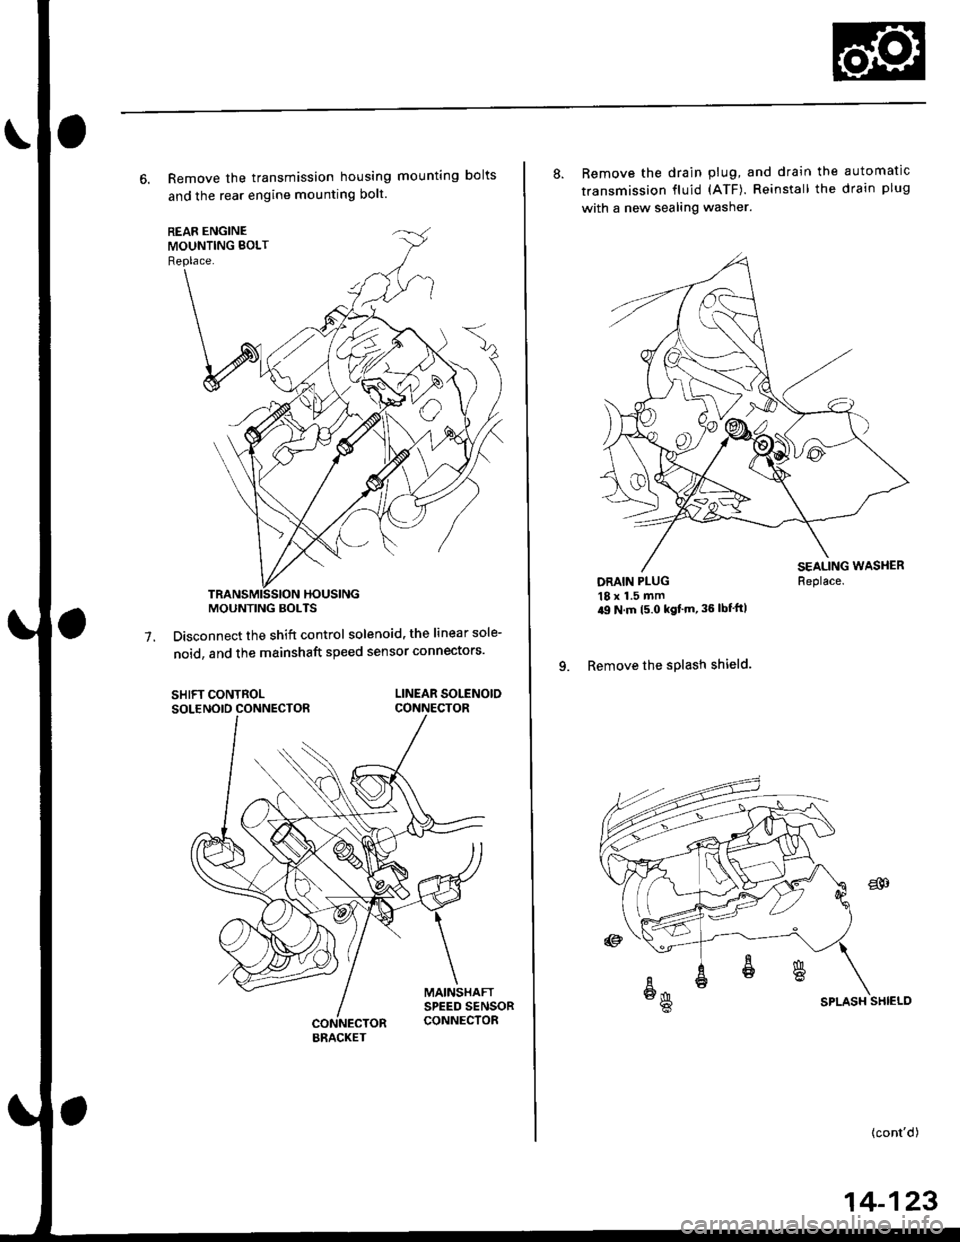 HONDA CIVIC 1996 6.G Workshop Manual 6. Remove the transmission housing mounting bolts
and the rear engine mounting bolt.
Disconnect the shift control solenoid, the linear sole-
noid, and the mainshaft speed sensor connectors7.
SHIFT CO